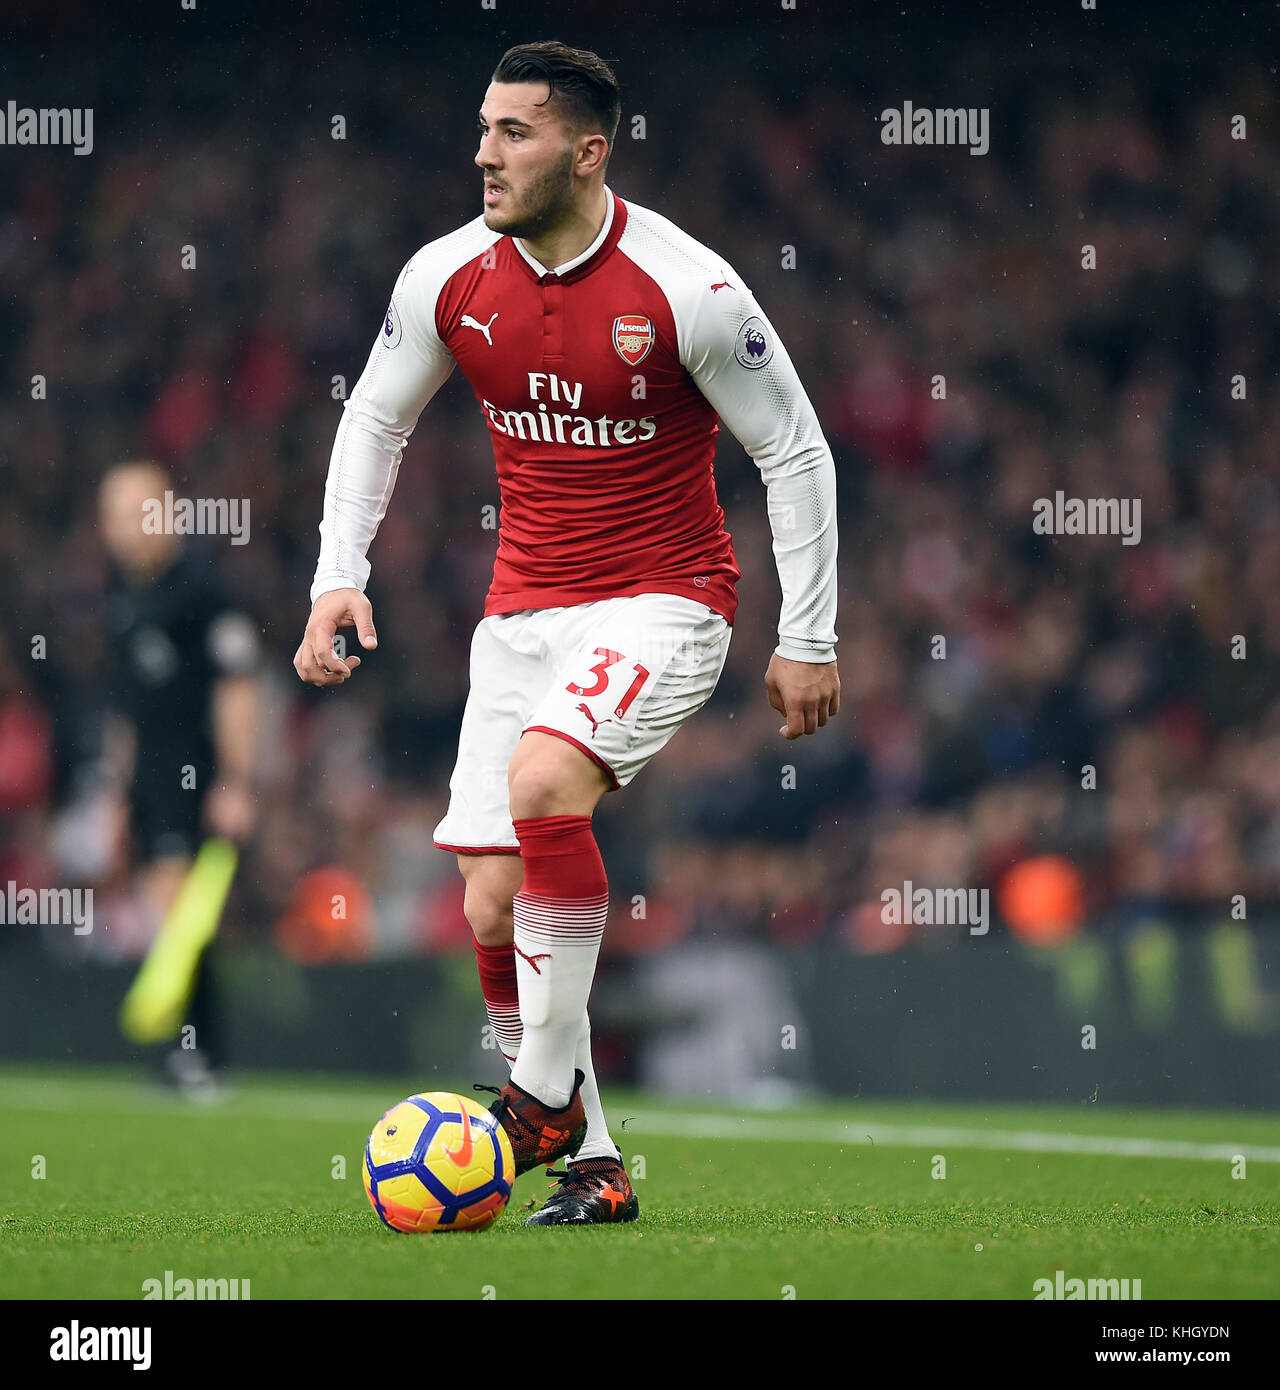 Sead Kolasinac of Arsenal ARSENAL V TOTTENHAM HOTSPUR ARSENAL V TOTTENHAM HOTSPUR, PREMIER LEAGUE 18 November 2017 GBB5474 PREMIER LEAGUE 18/11/17 STRICTLY EDITORIAL USE ONLY. If The Player/Players Depicted In This Image Is/Are Playing For An English Club Or The England National Team. Then This Image May Only Be Used For Editorial Purposes. No Commercial Use. The Following Usages Are Also Restricted EVEN IF IN AN EDITORIAL CONTEXT: Use in conjuction with, or part of, any unauthorized audio, video, data, fixture lists, club/league logos, Betting, Games or any 'live' services. Stock Photo